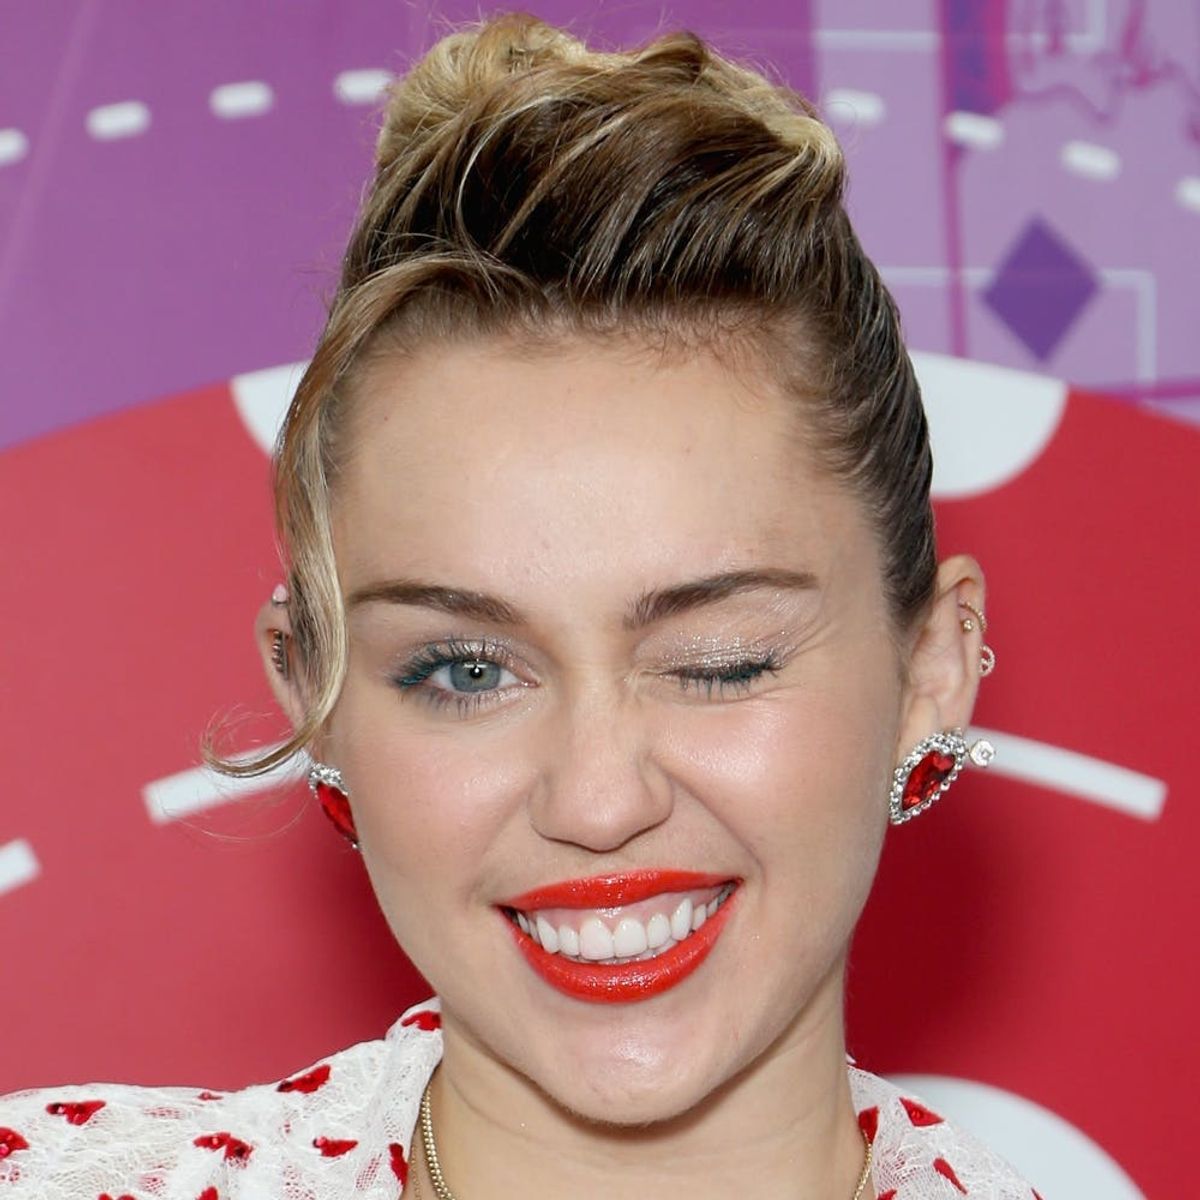 Miley Cyrus’ Converse Sneaker Collab Is Fit for a Unicorn Glitter Queen